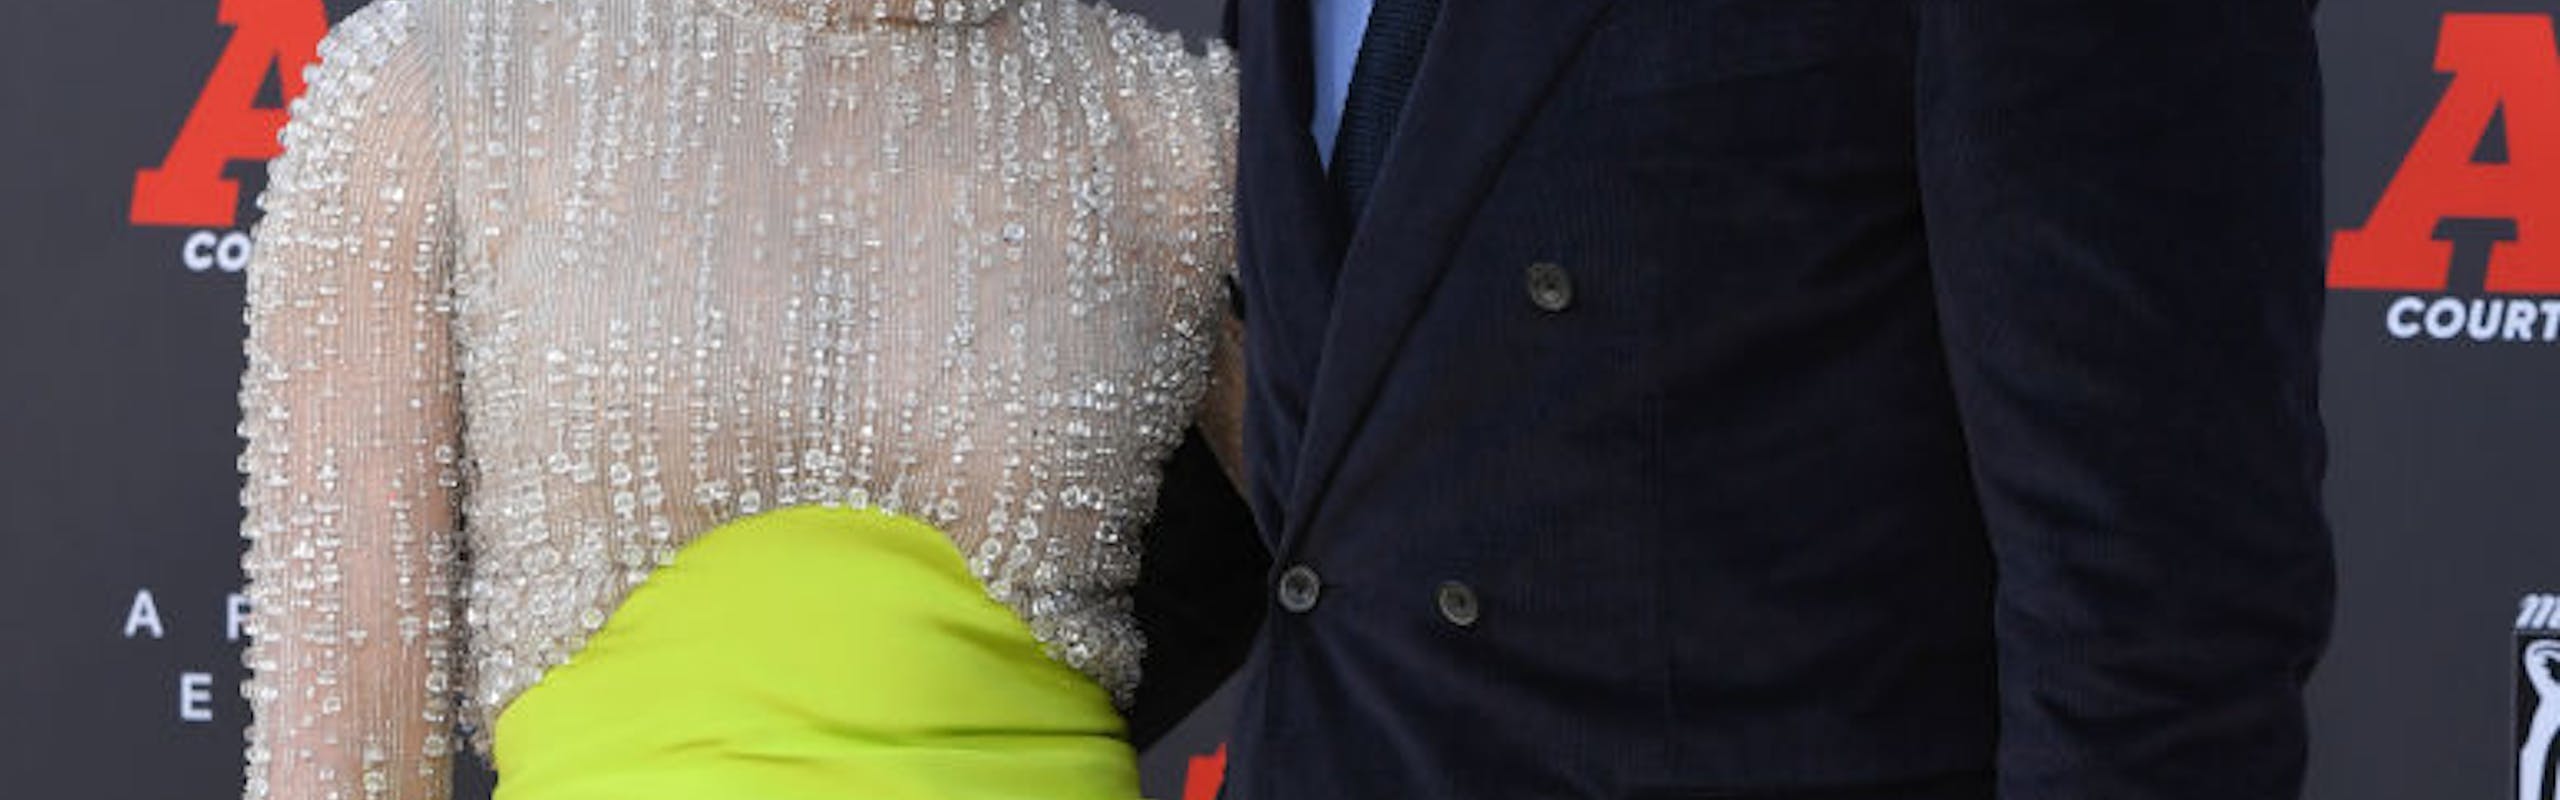 Jennifer Lopez in a neon dress and Ben Affleck in a black suit.